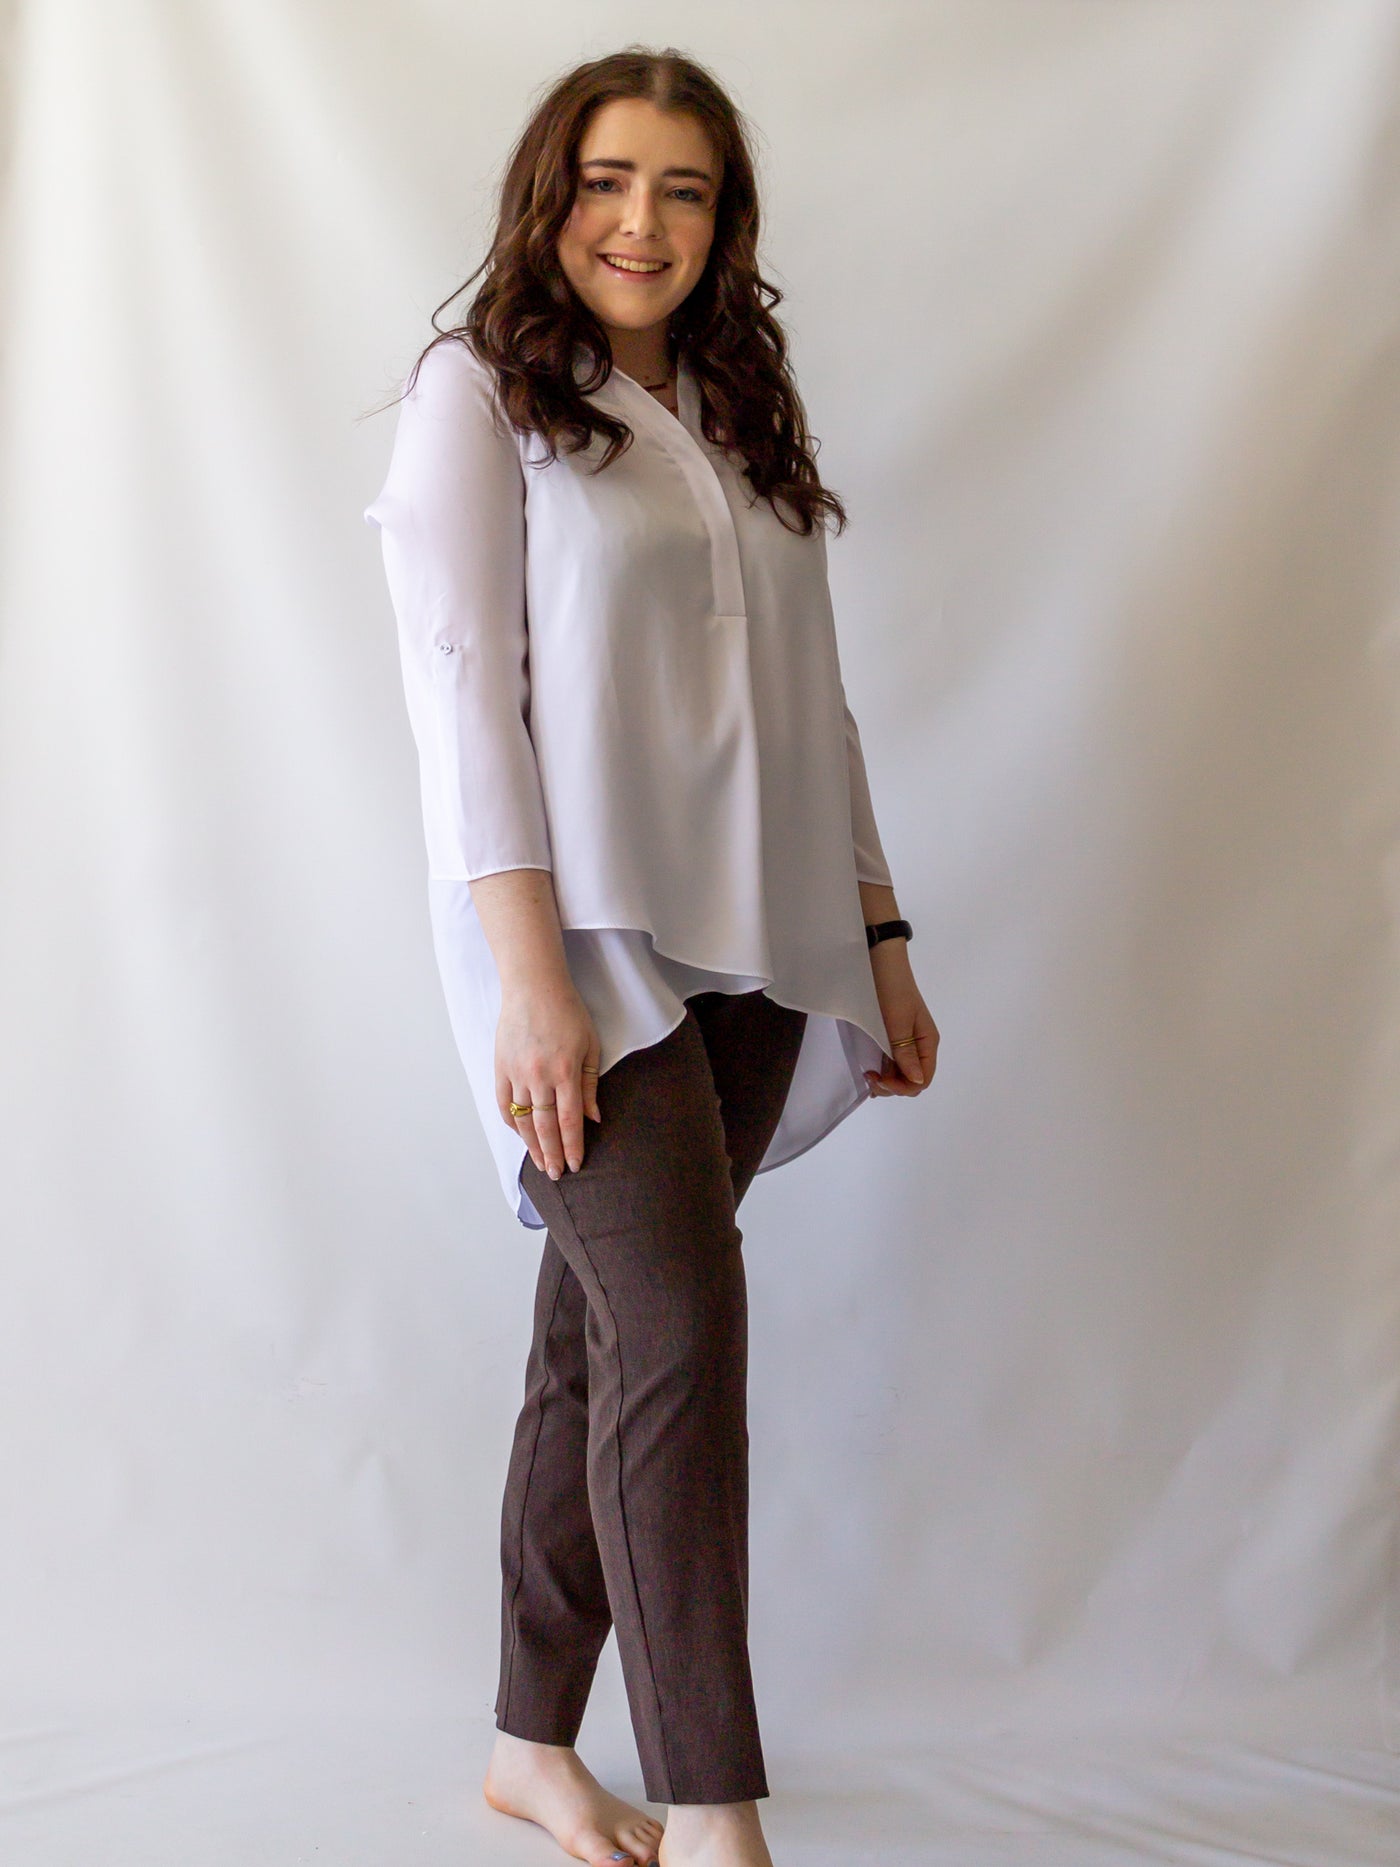 A model wearing a white, long flowy pants with heather brown colored cigarette style pants.